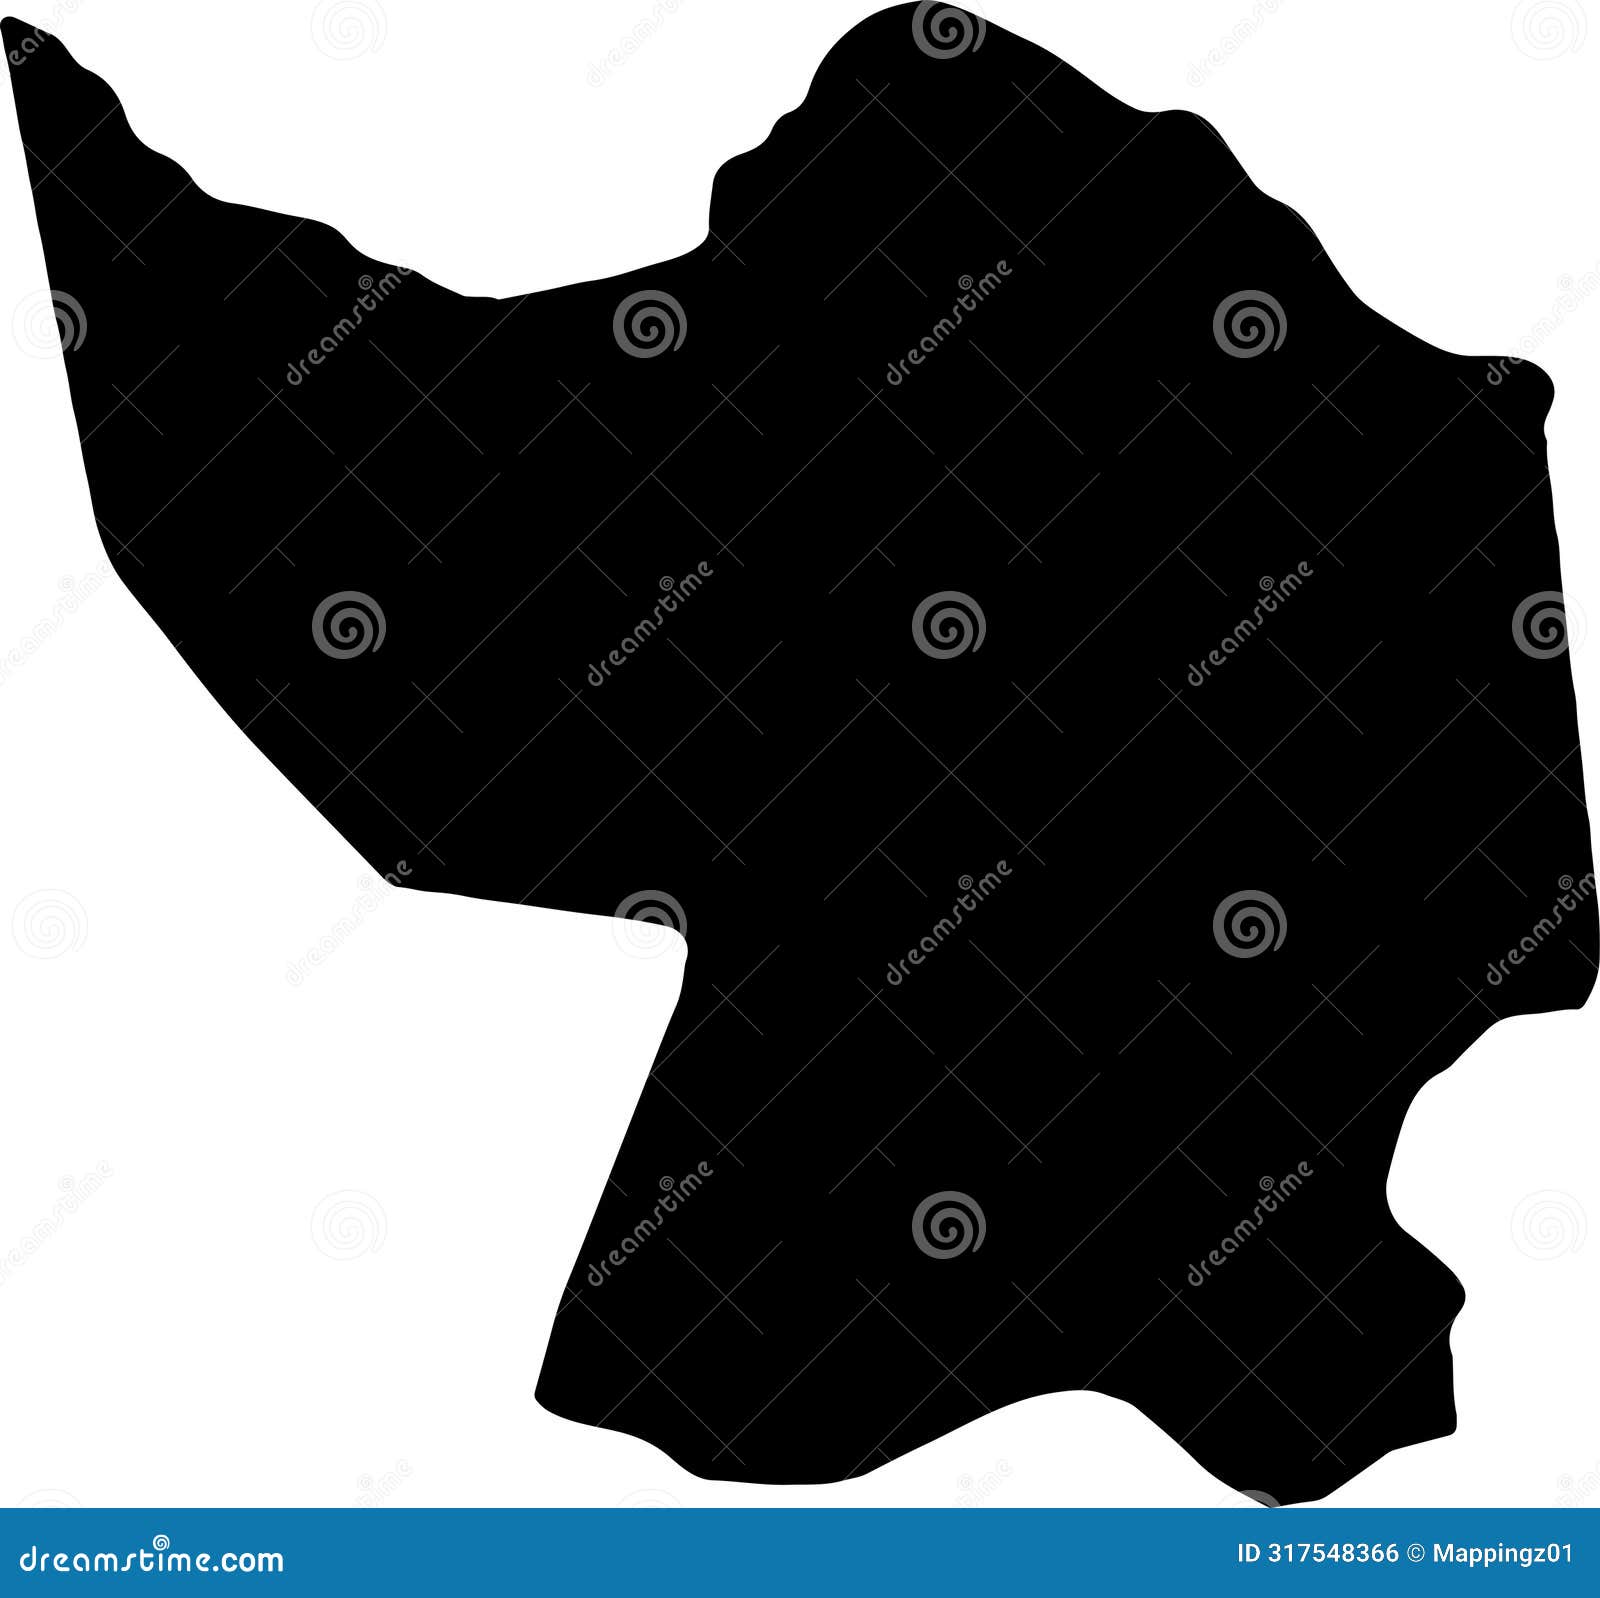 misiones paraguay silhouette map with transparent background